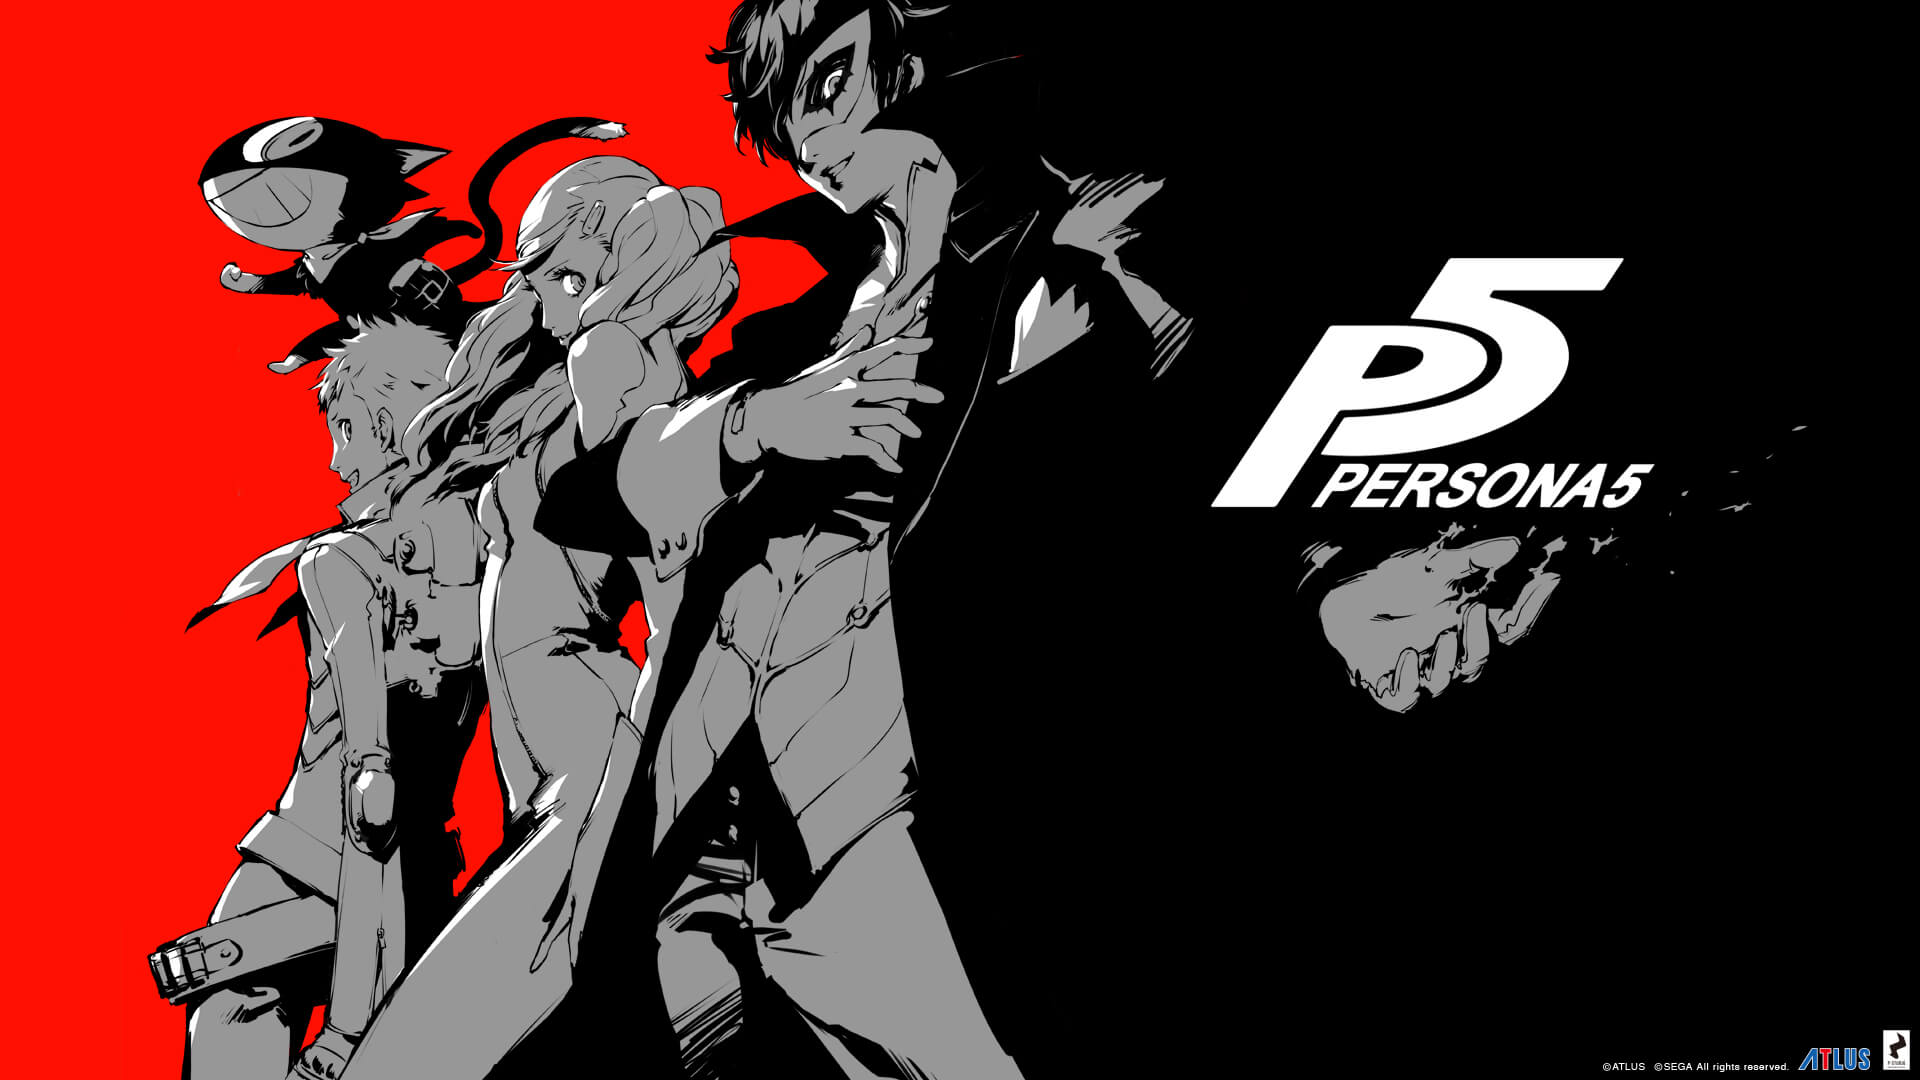 Persona 5 is the Latest Video Game to get an Animated Adaptation